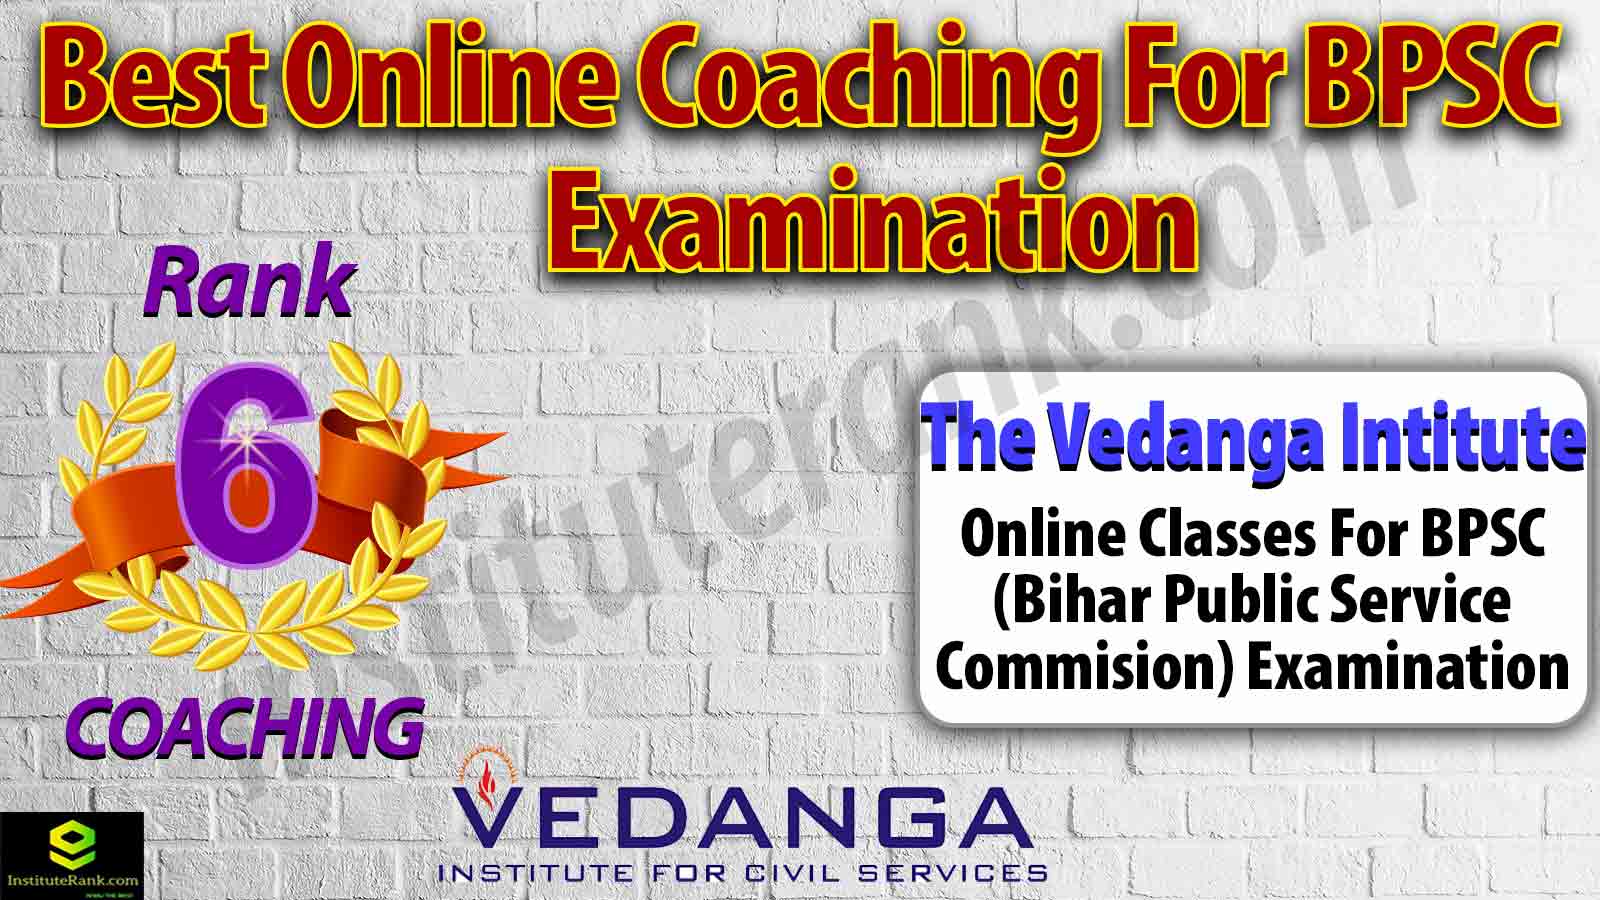 Best Online Coaching for BPSC Exam Preparation